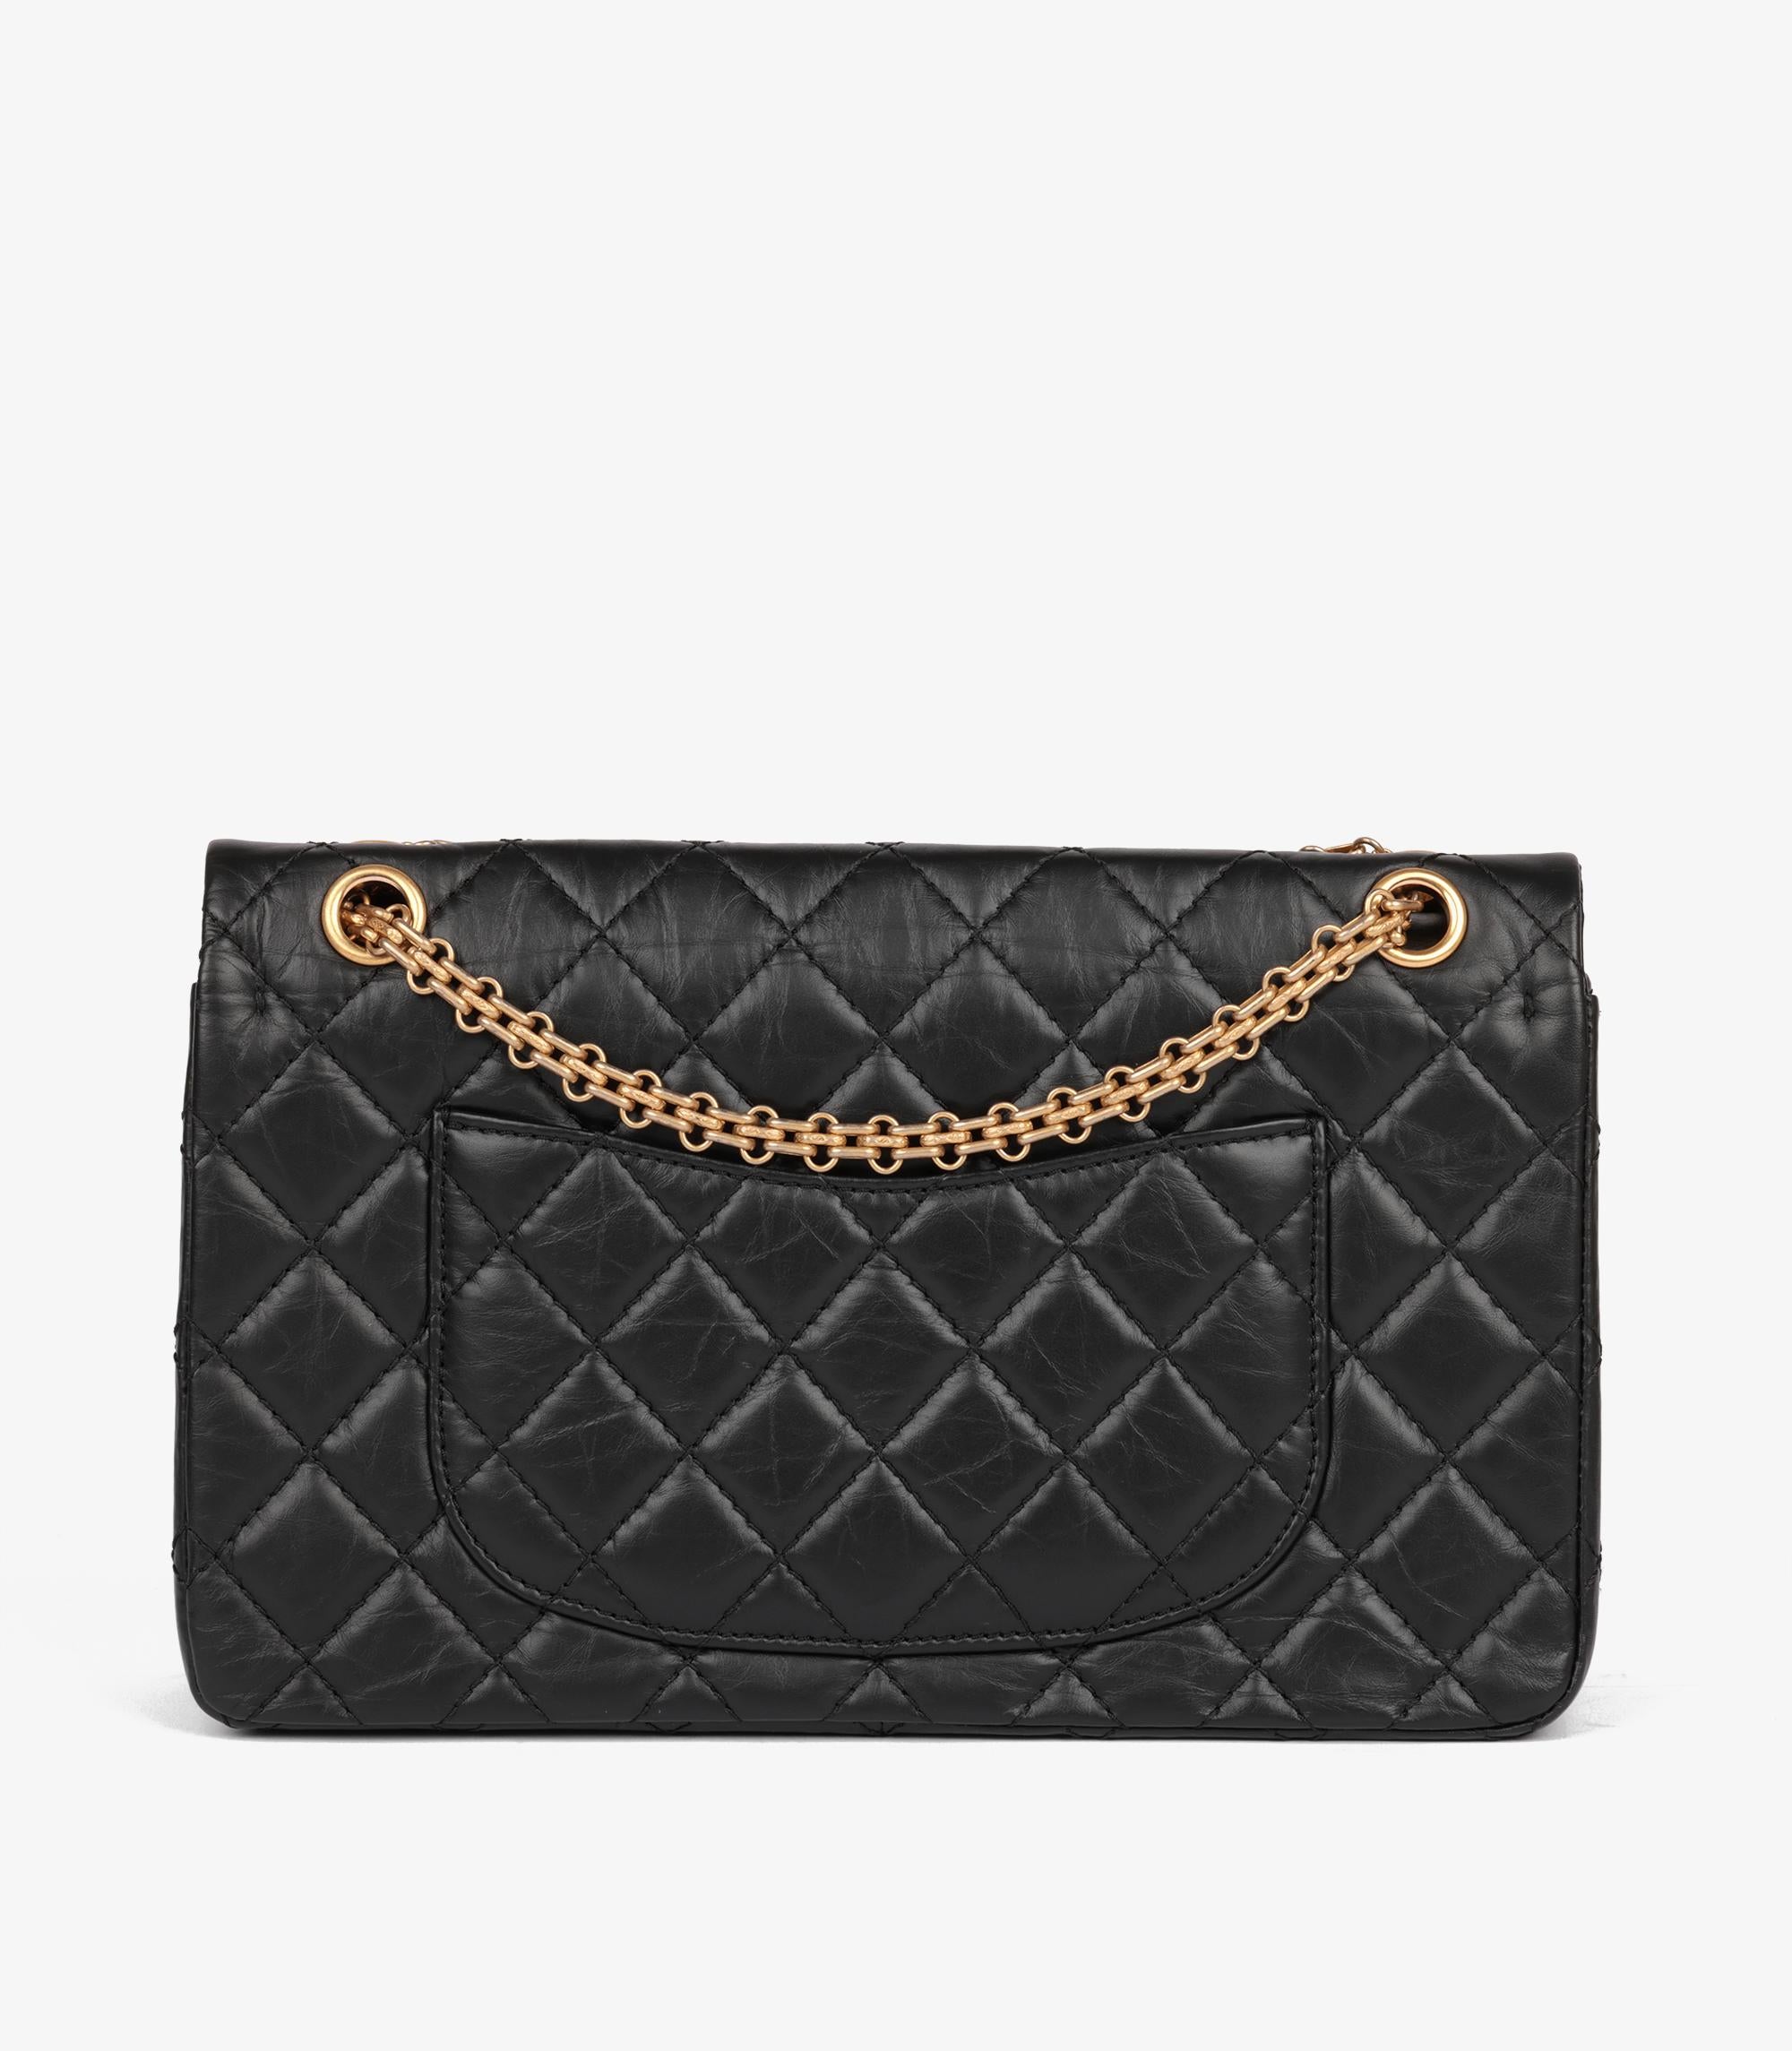 Chanel Black Quilted Crinkled Calfskin Leather 226 2.55 Reissue Double Flap Bag For Sale 4